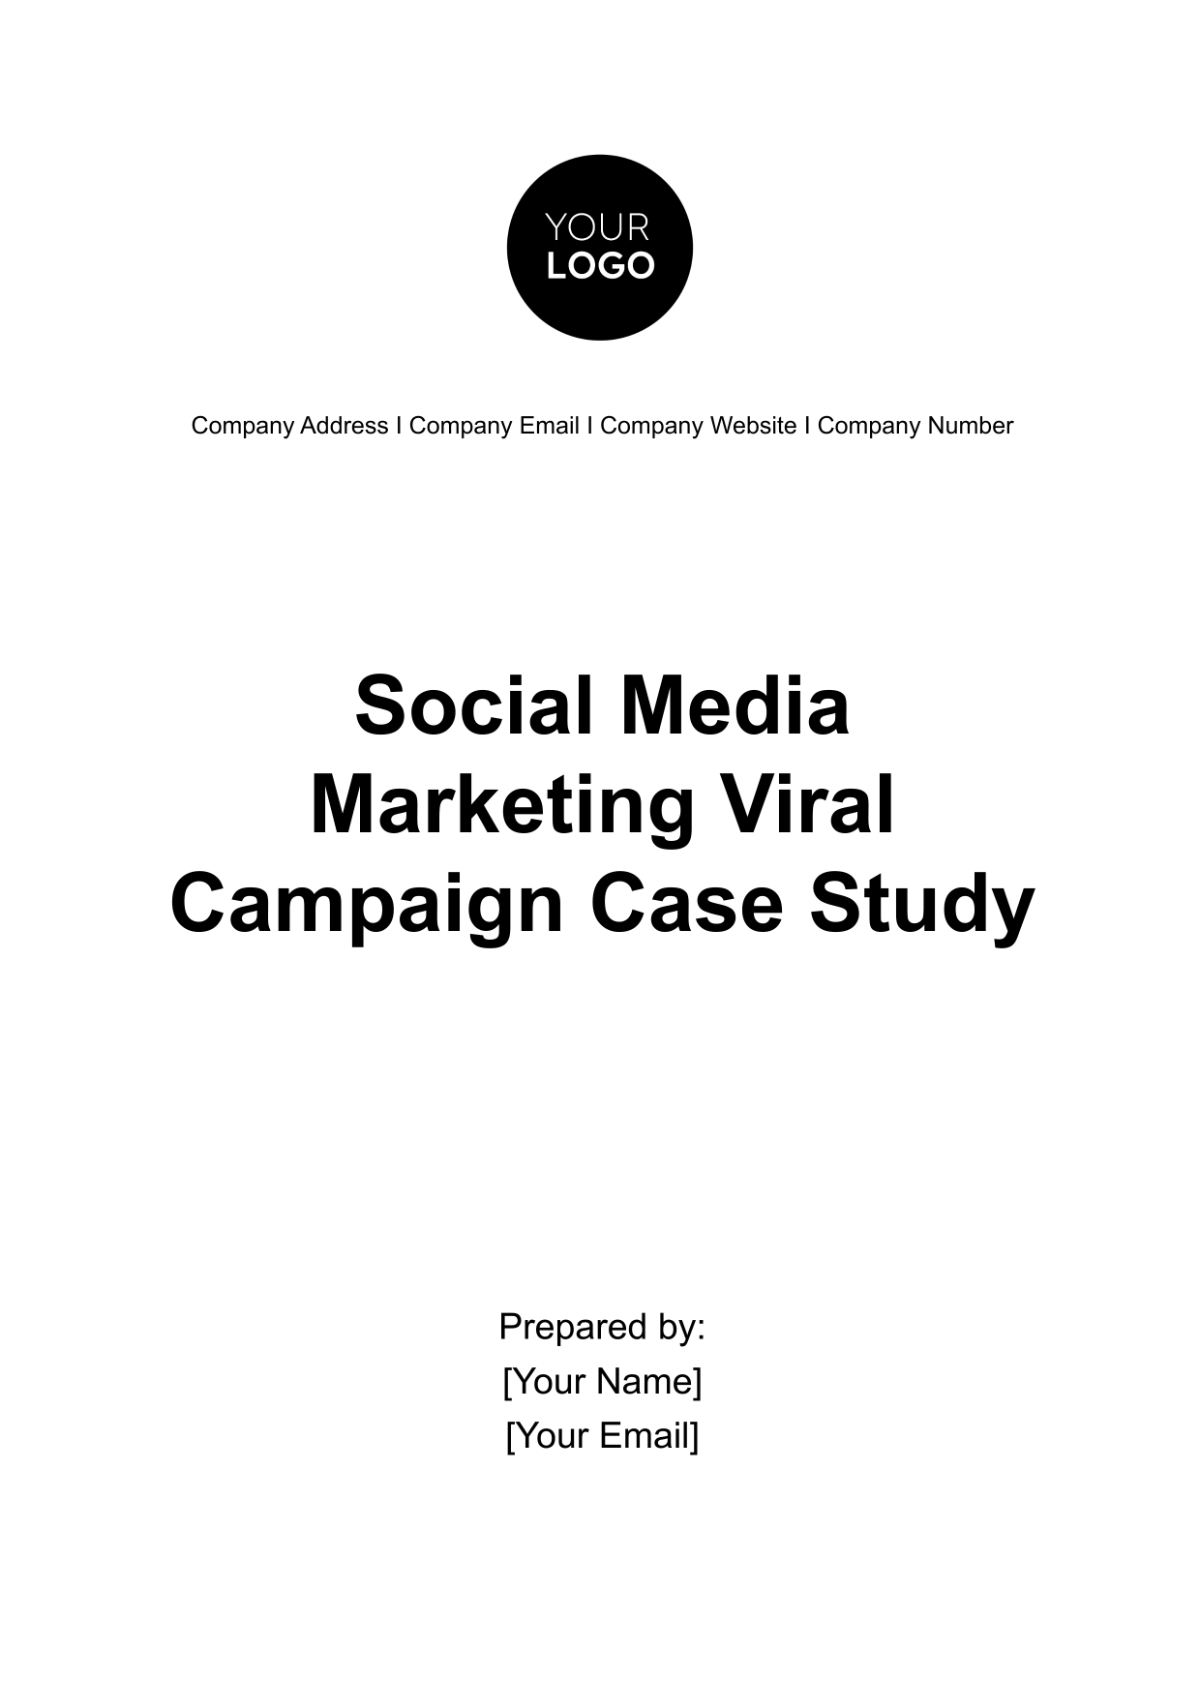 Social Media Marketing Viral Campaign Case Study Template